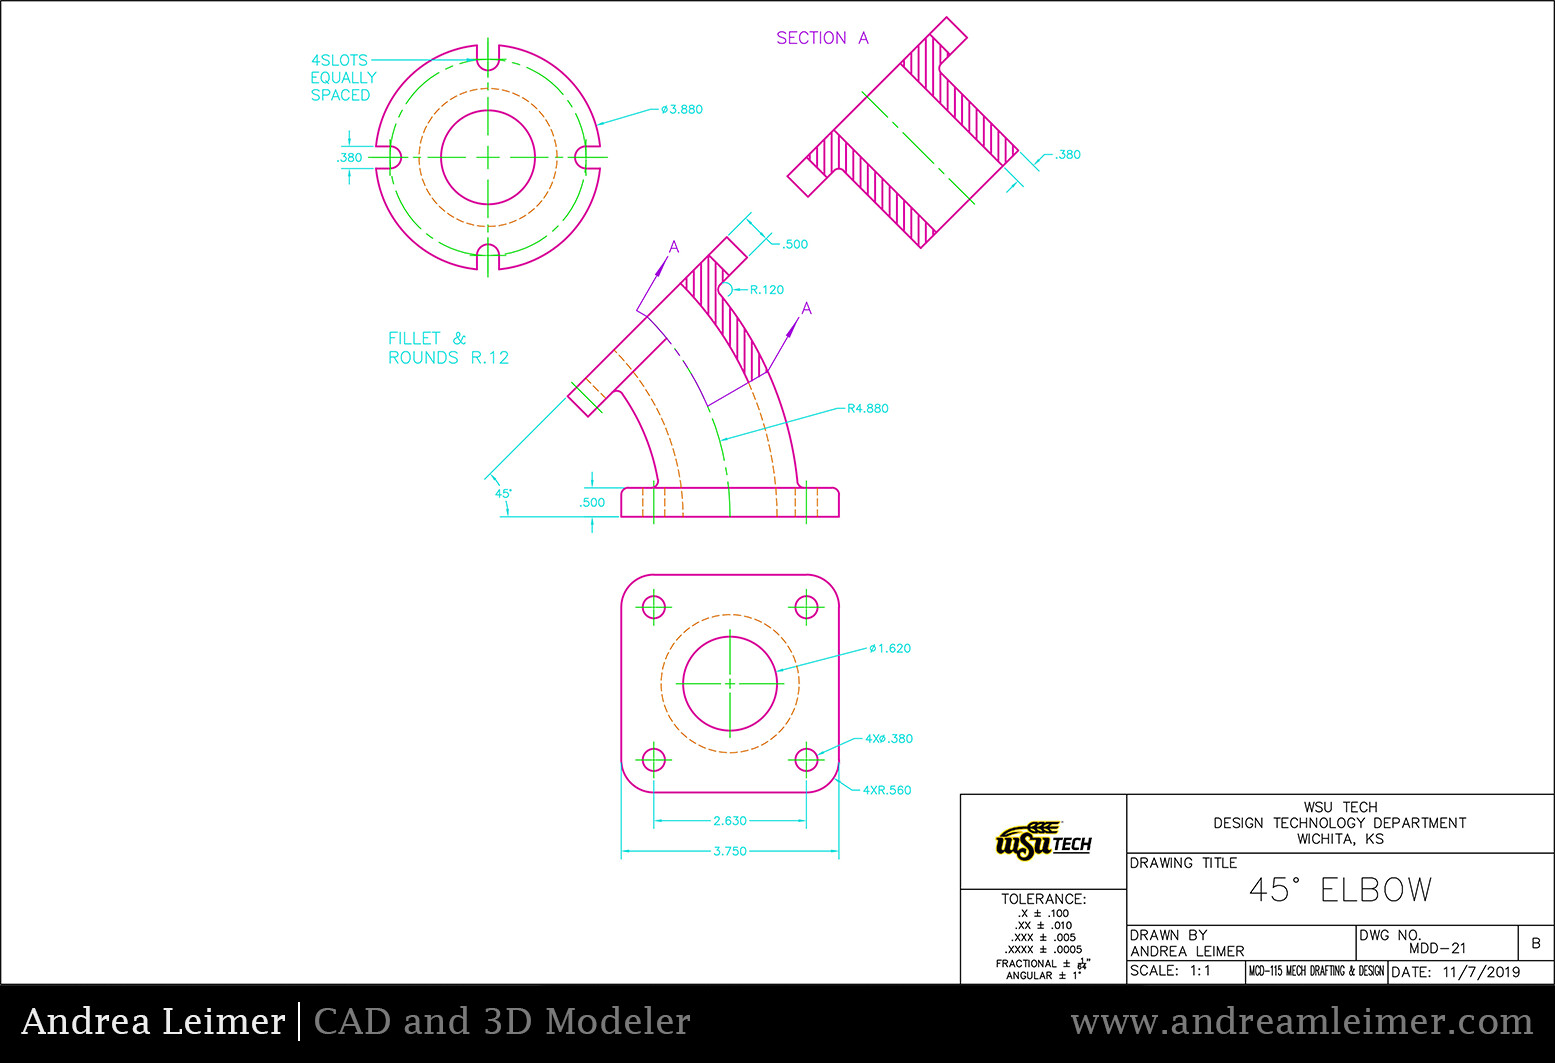 MDD-21 with Front View with Half Section, Bottom View, an Auxiliary View, and an Auxiliary Offset Section View.